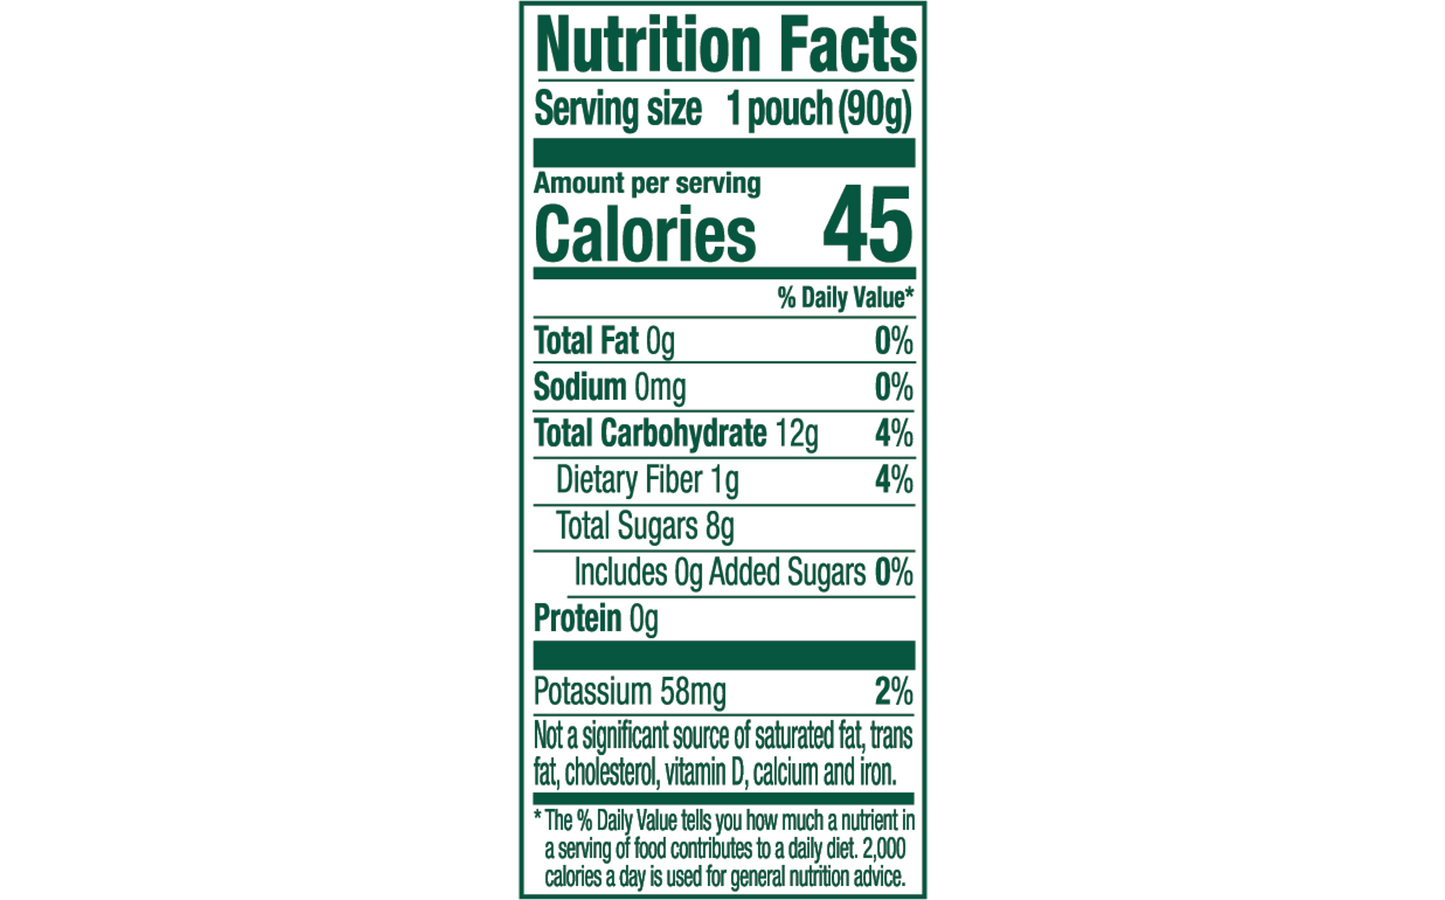 Nutrition facts for Buddy Fruits Apple & Cinnamon fruit pouch.